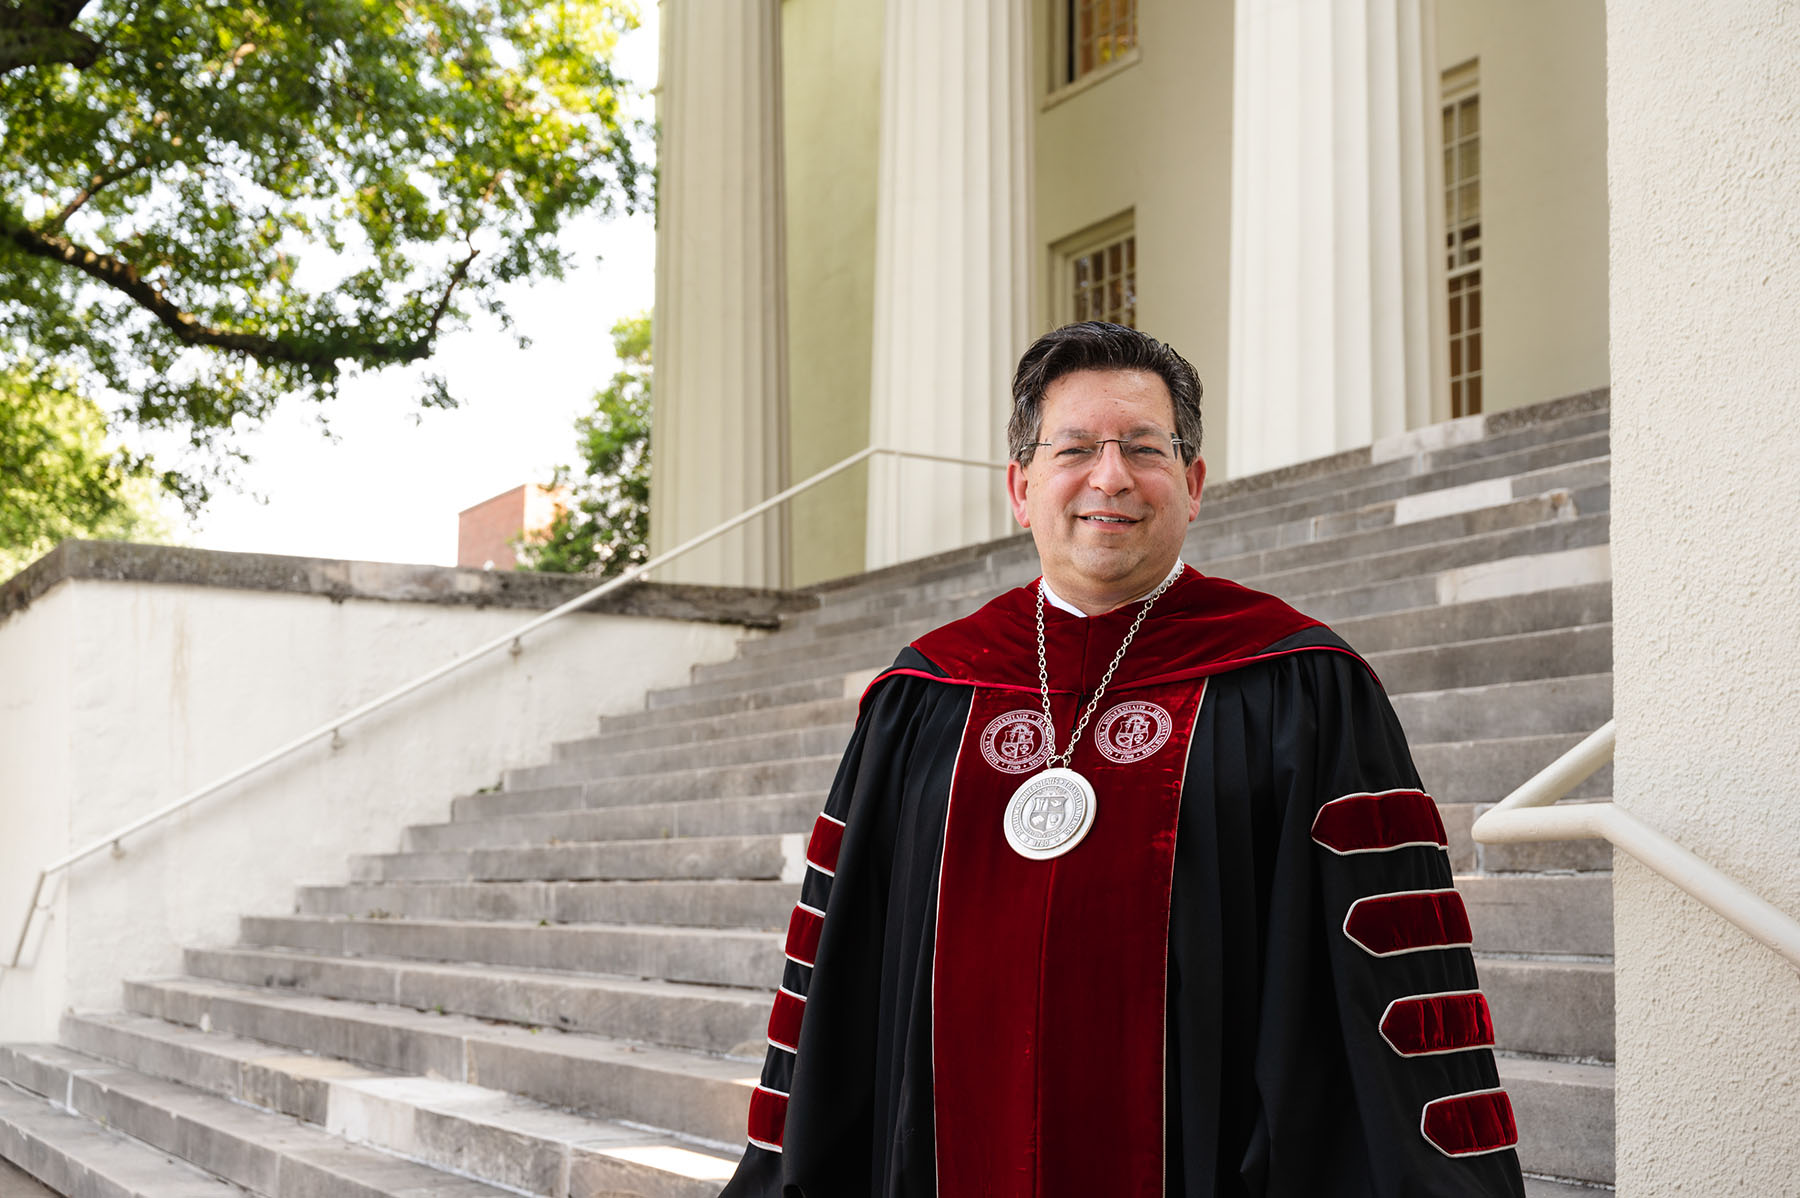 Remarks by Brien Lewis on his installation as Transylvania’s 28th president